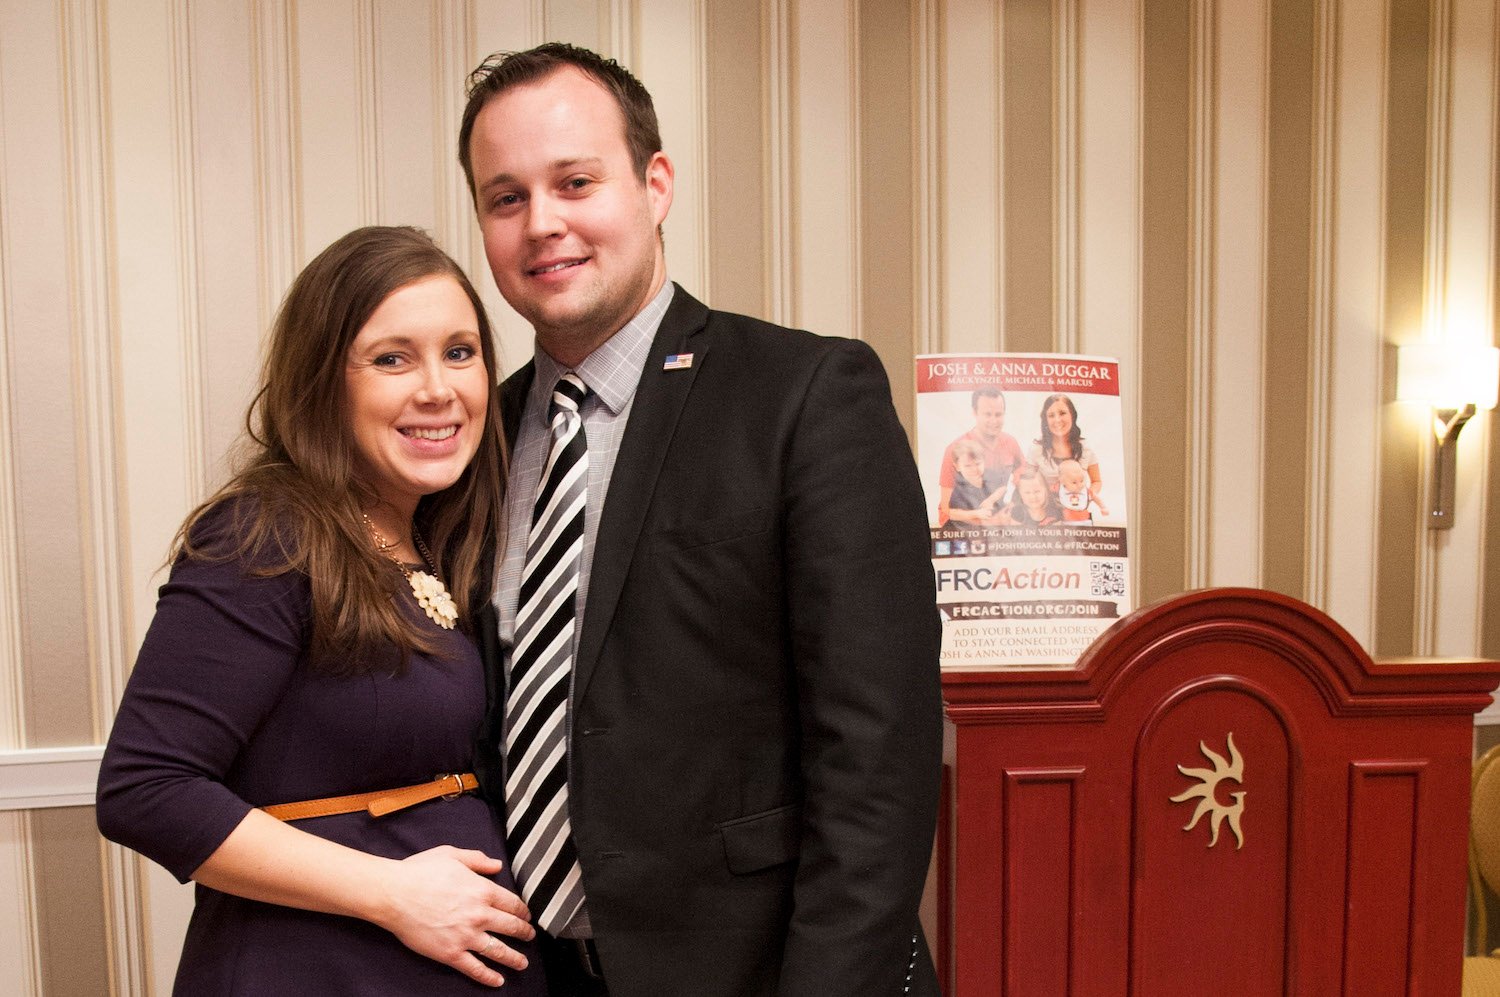 Anna Duggar and Josh Duggar of the Duggar family standing together and smiling